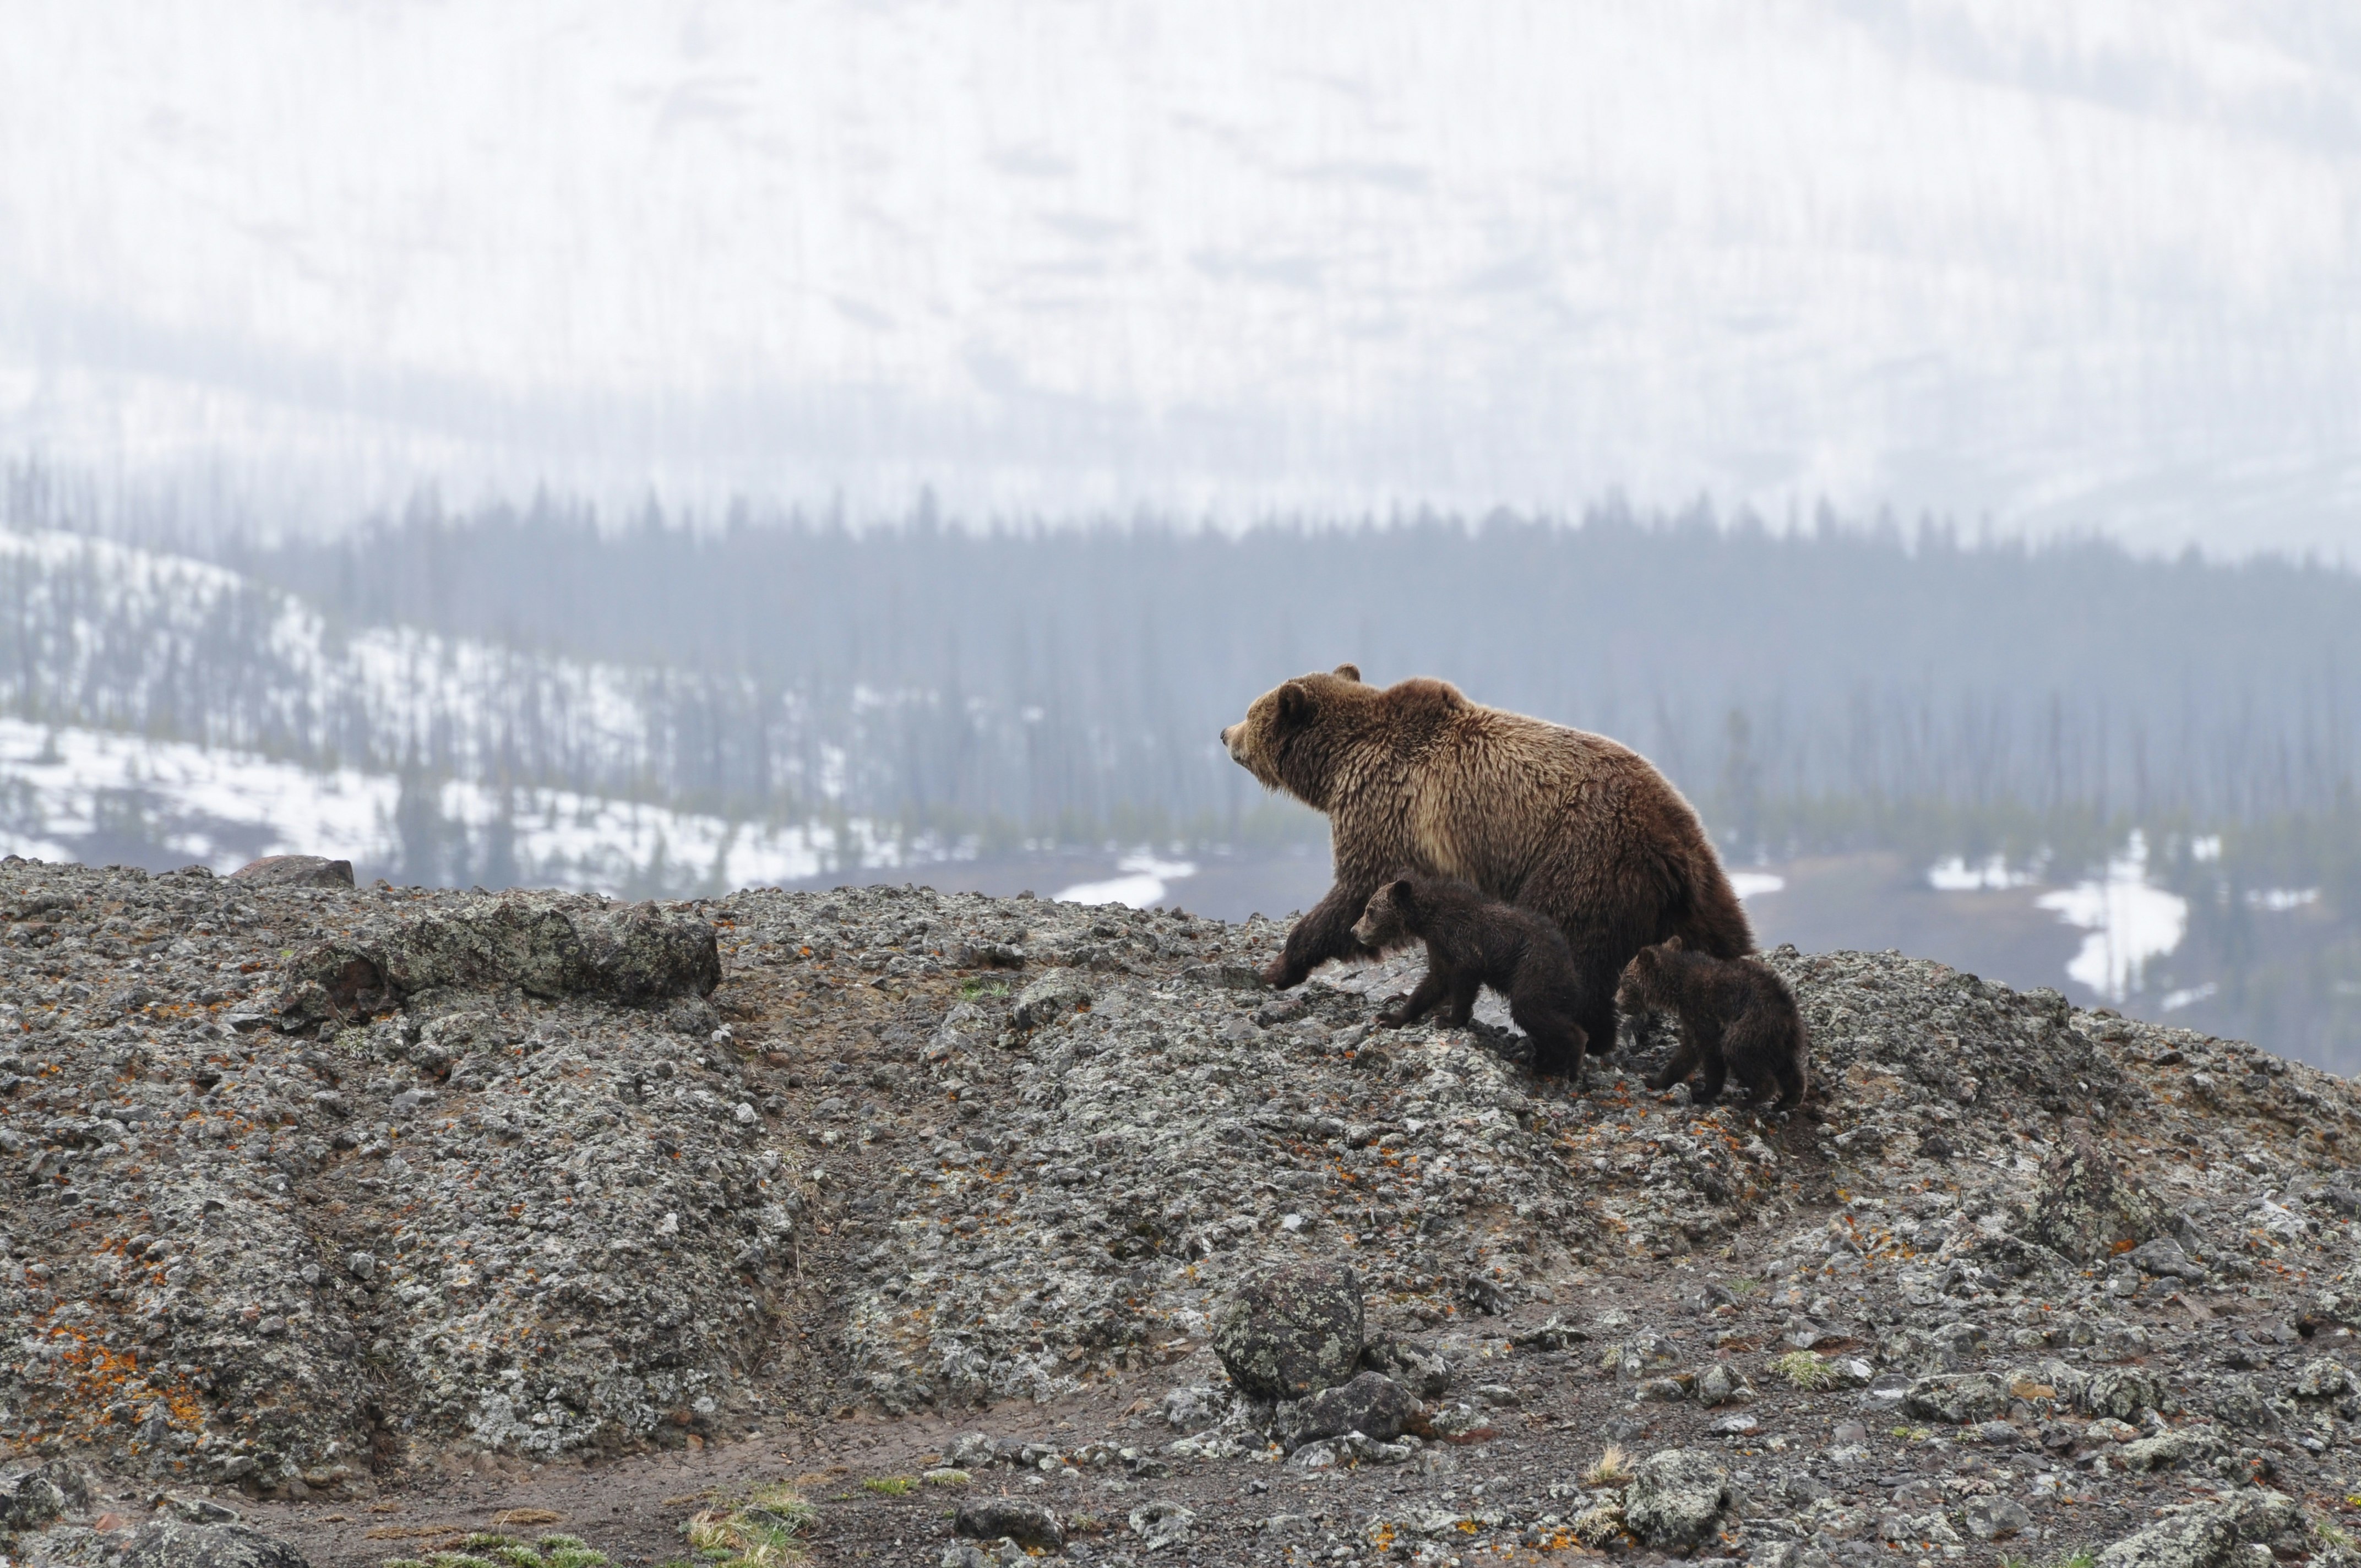 A brown bear and her two cubs walk a rocky ridgeline. In the background is an expanse of forest and snow.